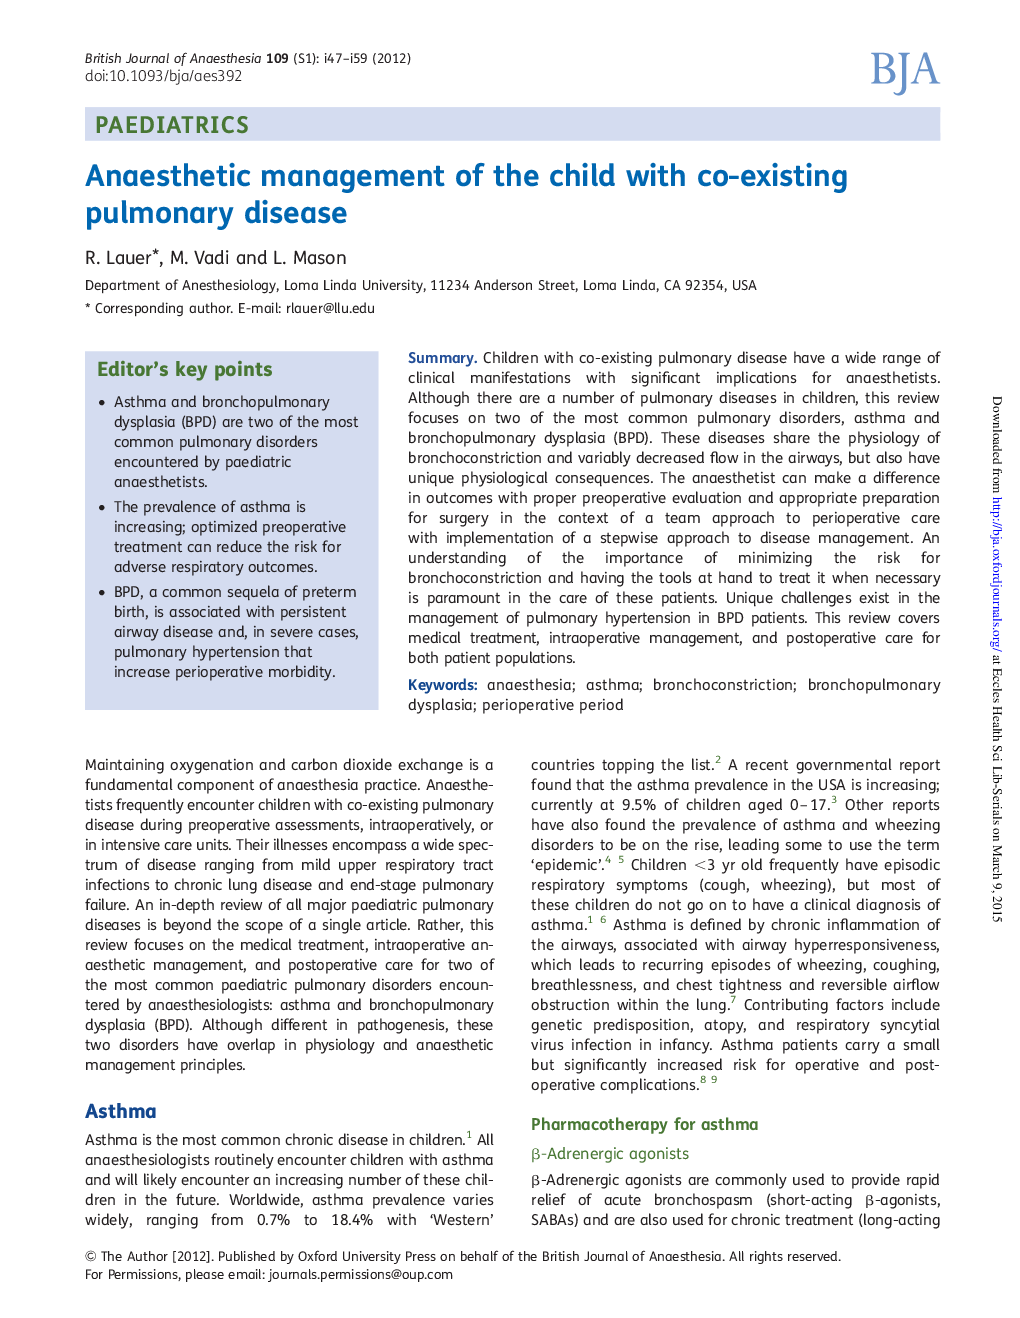 Anaesthetic management of the child with co-existing pulmonary disease